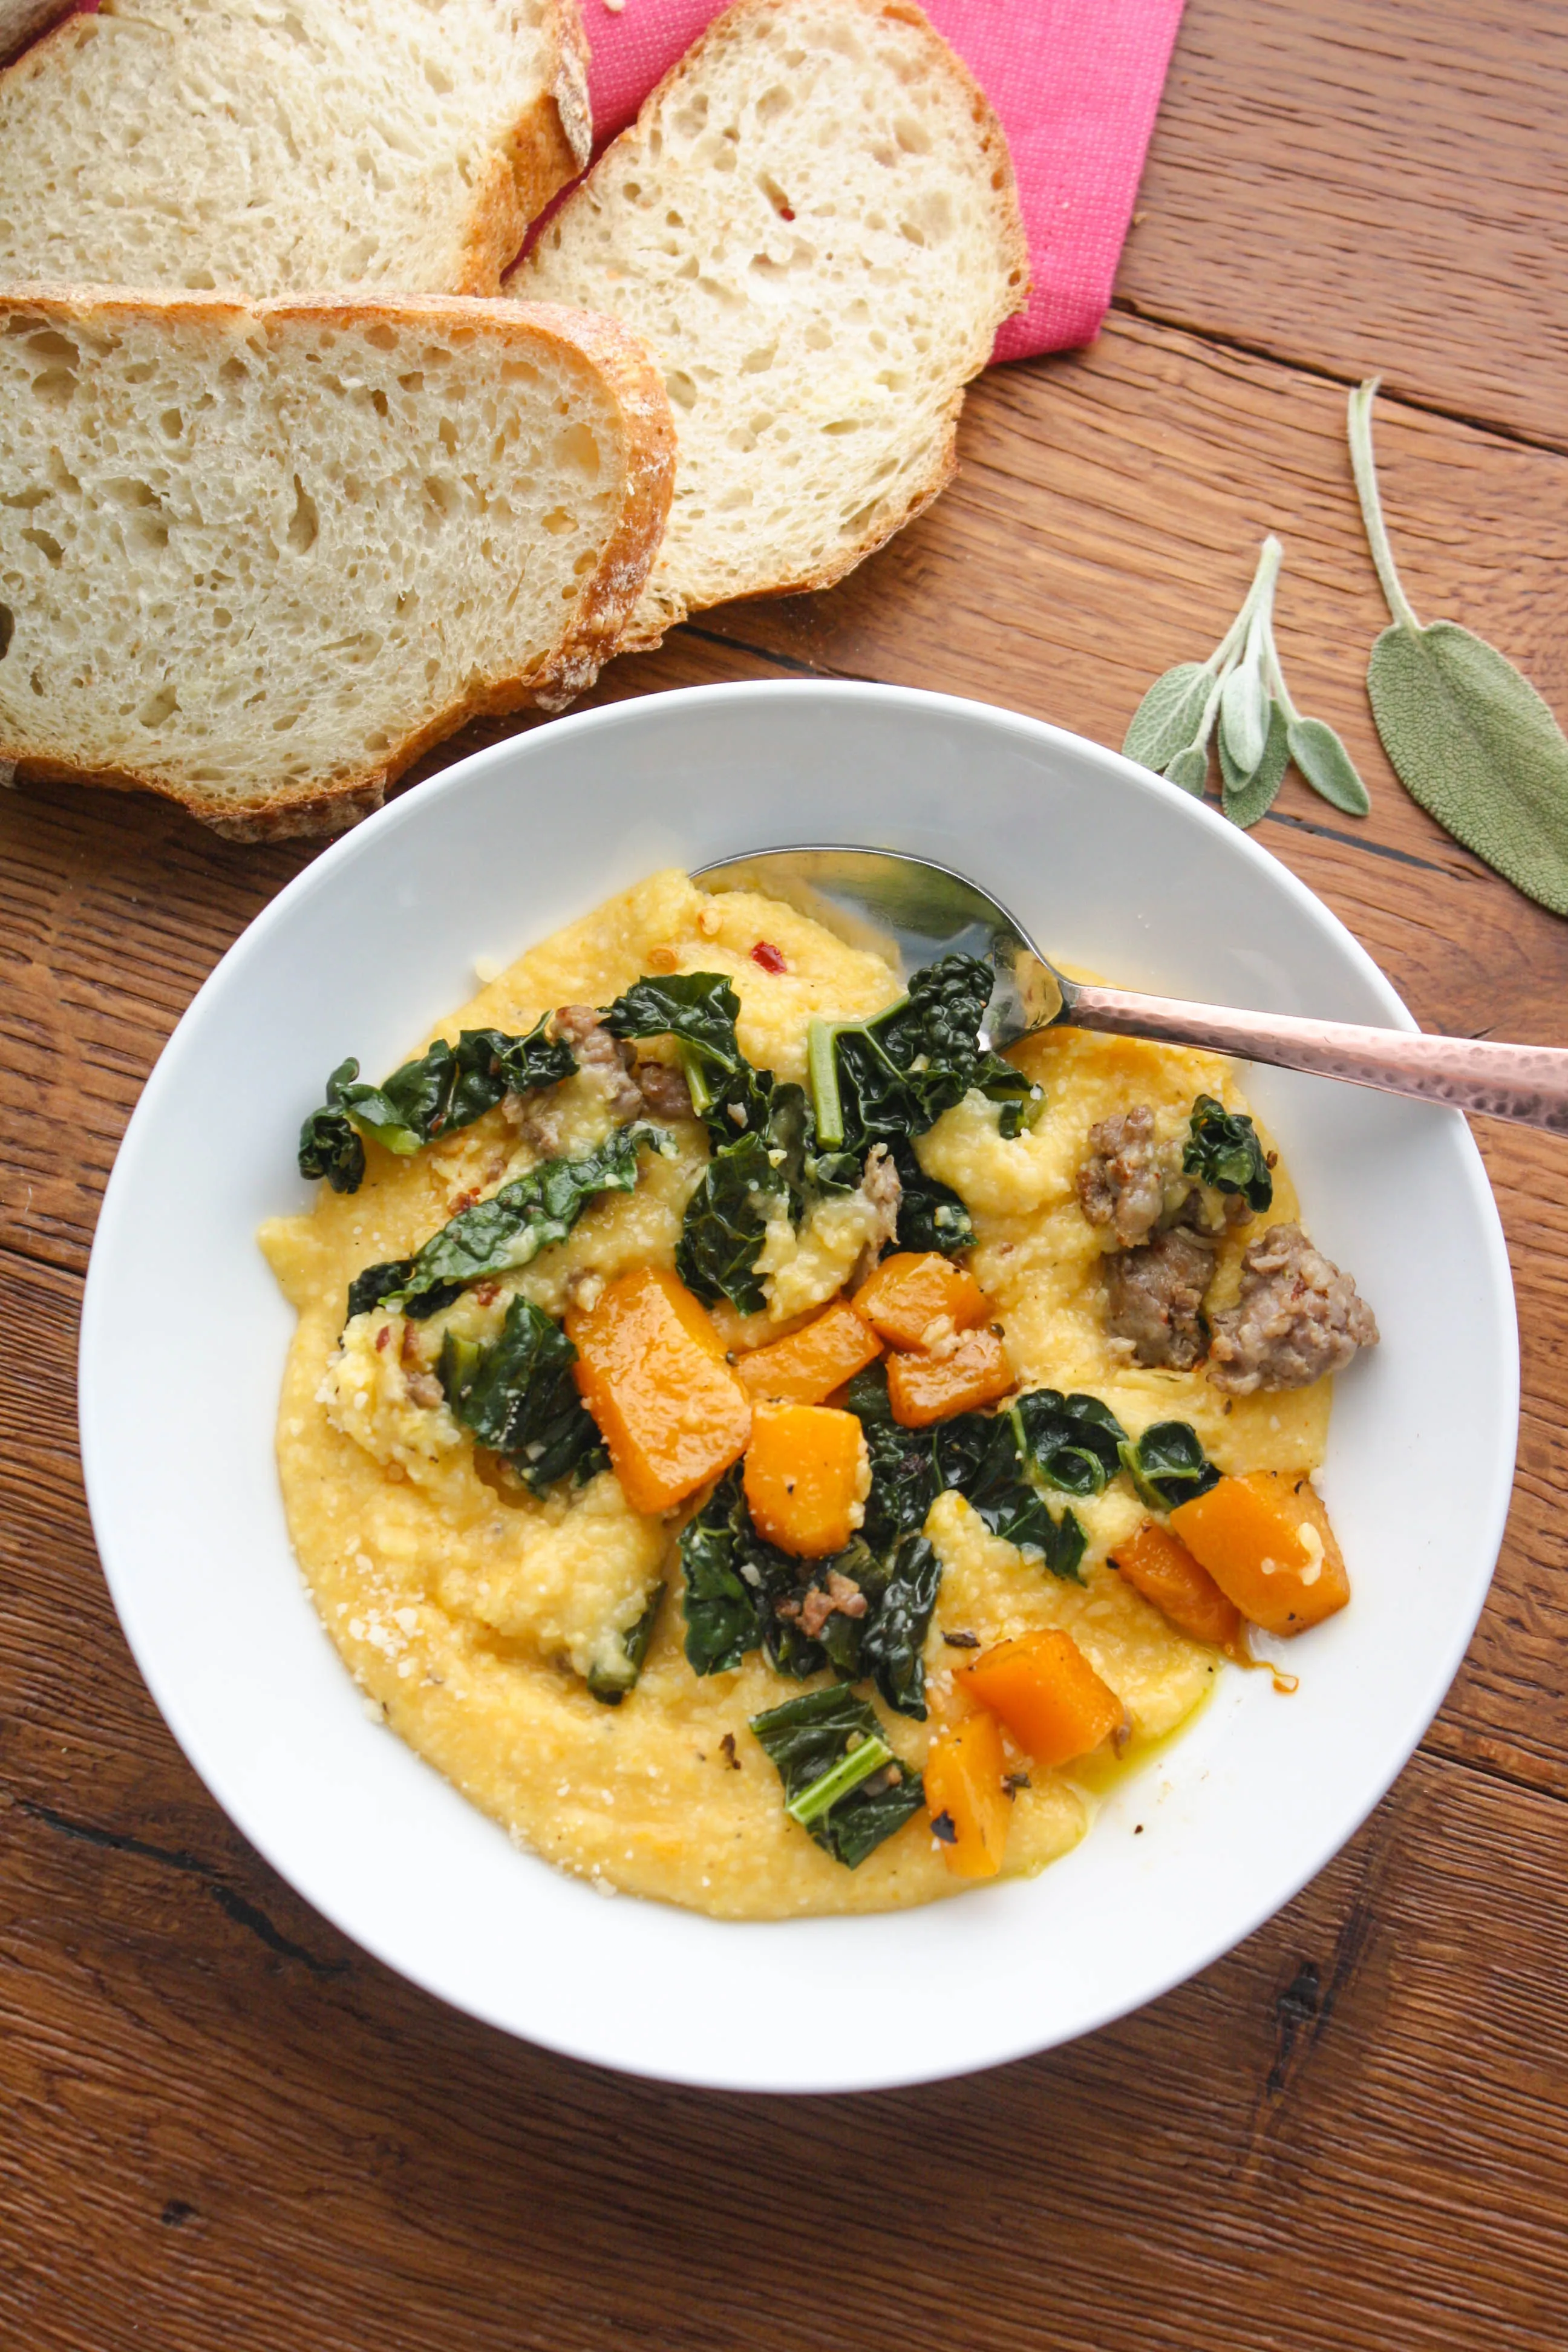 Butternut Squash Grits with Sausage and Kale is a hearty and warming dish to serve when it's cold out. You'll love this hearty and comforting grits dish.